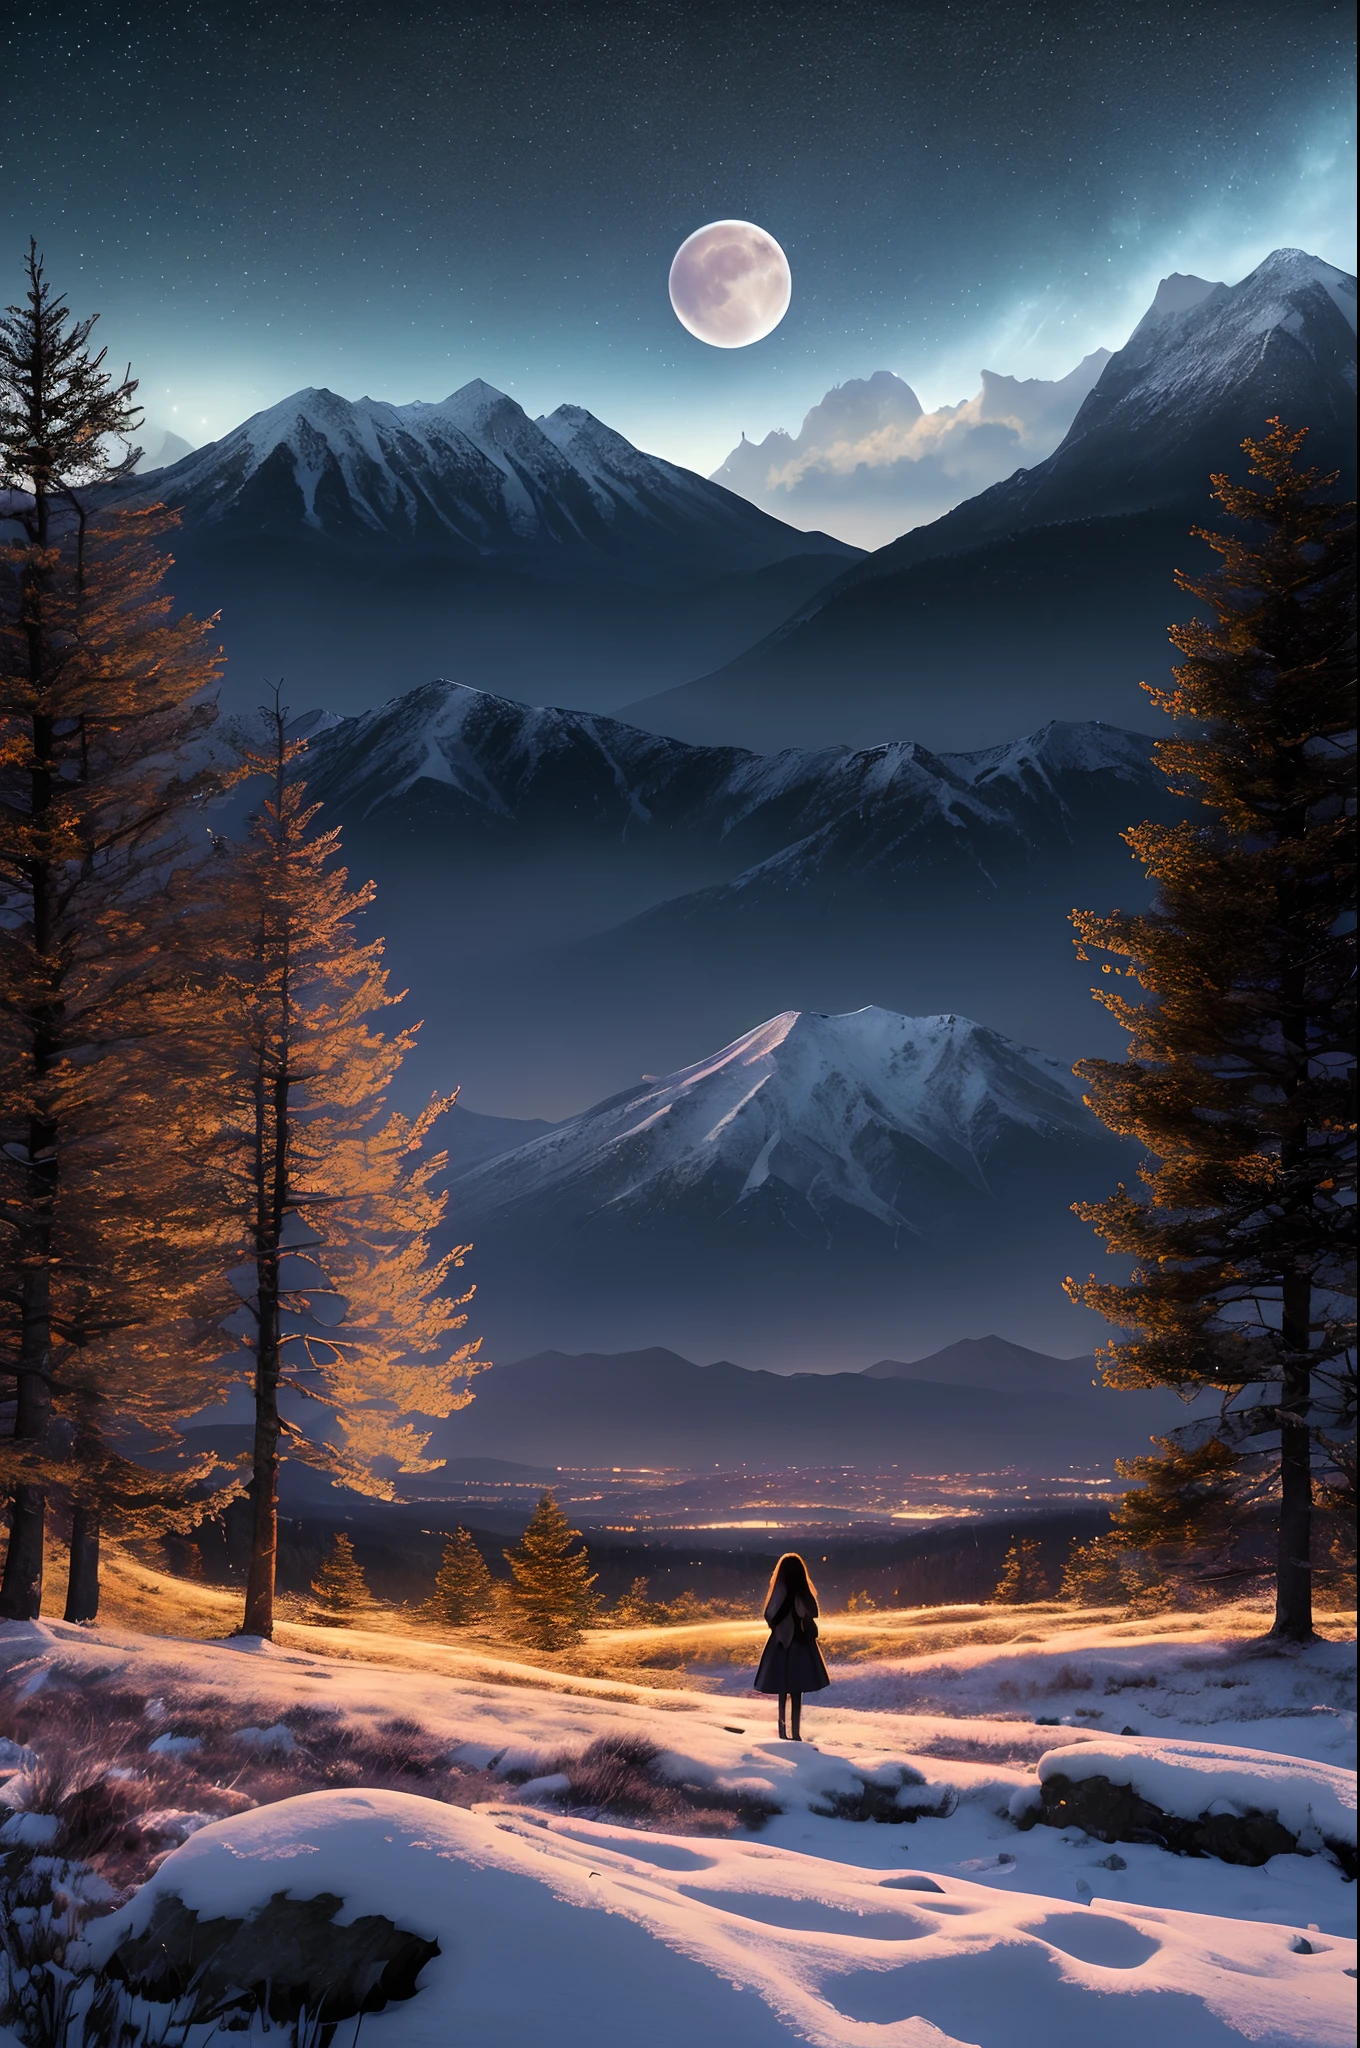 A wide landscape photo, (viewed from below, the sky is above, and the open field is below), a girl standing on a flower field looking up, (full moon: 1.2), (meteor: 0.9), (nebula: 1.3), distant mountains , Trees BREAK Crafting Art, (Warm Light: 1.2), (Firefly: 1.2), Lights, Lots of Purple and Orange, Intricate Details, Volumetric Lighting BREAK (Masterpiece: 1.2), (Best Quality), 4k, Ultra Detailed, (Dynamic Composition: 1.4), Rich in Detail and Color, (Rainbow Color: 1.2), (Glow, Atmospheric Lighting), Dreamy, Magical, (Solo: 1.2), girl stands with her back to the viewer, (masterpiece:1.2, best quality:1.2), nature, stars, moon, landscape background, warm light, sunrise, forest, shadows, contrast, constellations, landscape,water,(extremely detailed CG unity 8k wallpaper), most beautiful artwork in the world,professional majestic oil painting,intricate, High Detail, Sharp focus, dramatic, photorealistic painting art, octans, sky, star (sky), scenery, starry sky, night, 1girl, night sky, solo, outdoors, signature, building, cloud, milky way, sitting, tree, long hair, city, silhouette, cityscape, Vast and majestic skyline、The big sky occupies two-thirds of the photo、Girls and boys in casual clothes sitting side by side in the meadow、There is a deserted Japan city in the distance, Snowy mountain night with snowy coniferous forest at the foot of the mountain。Full moon and many stars
Waiting to start